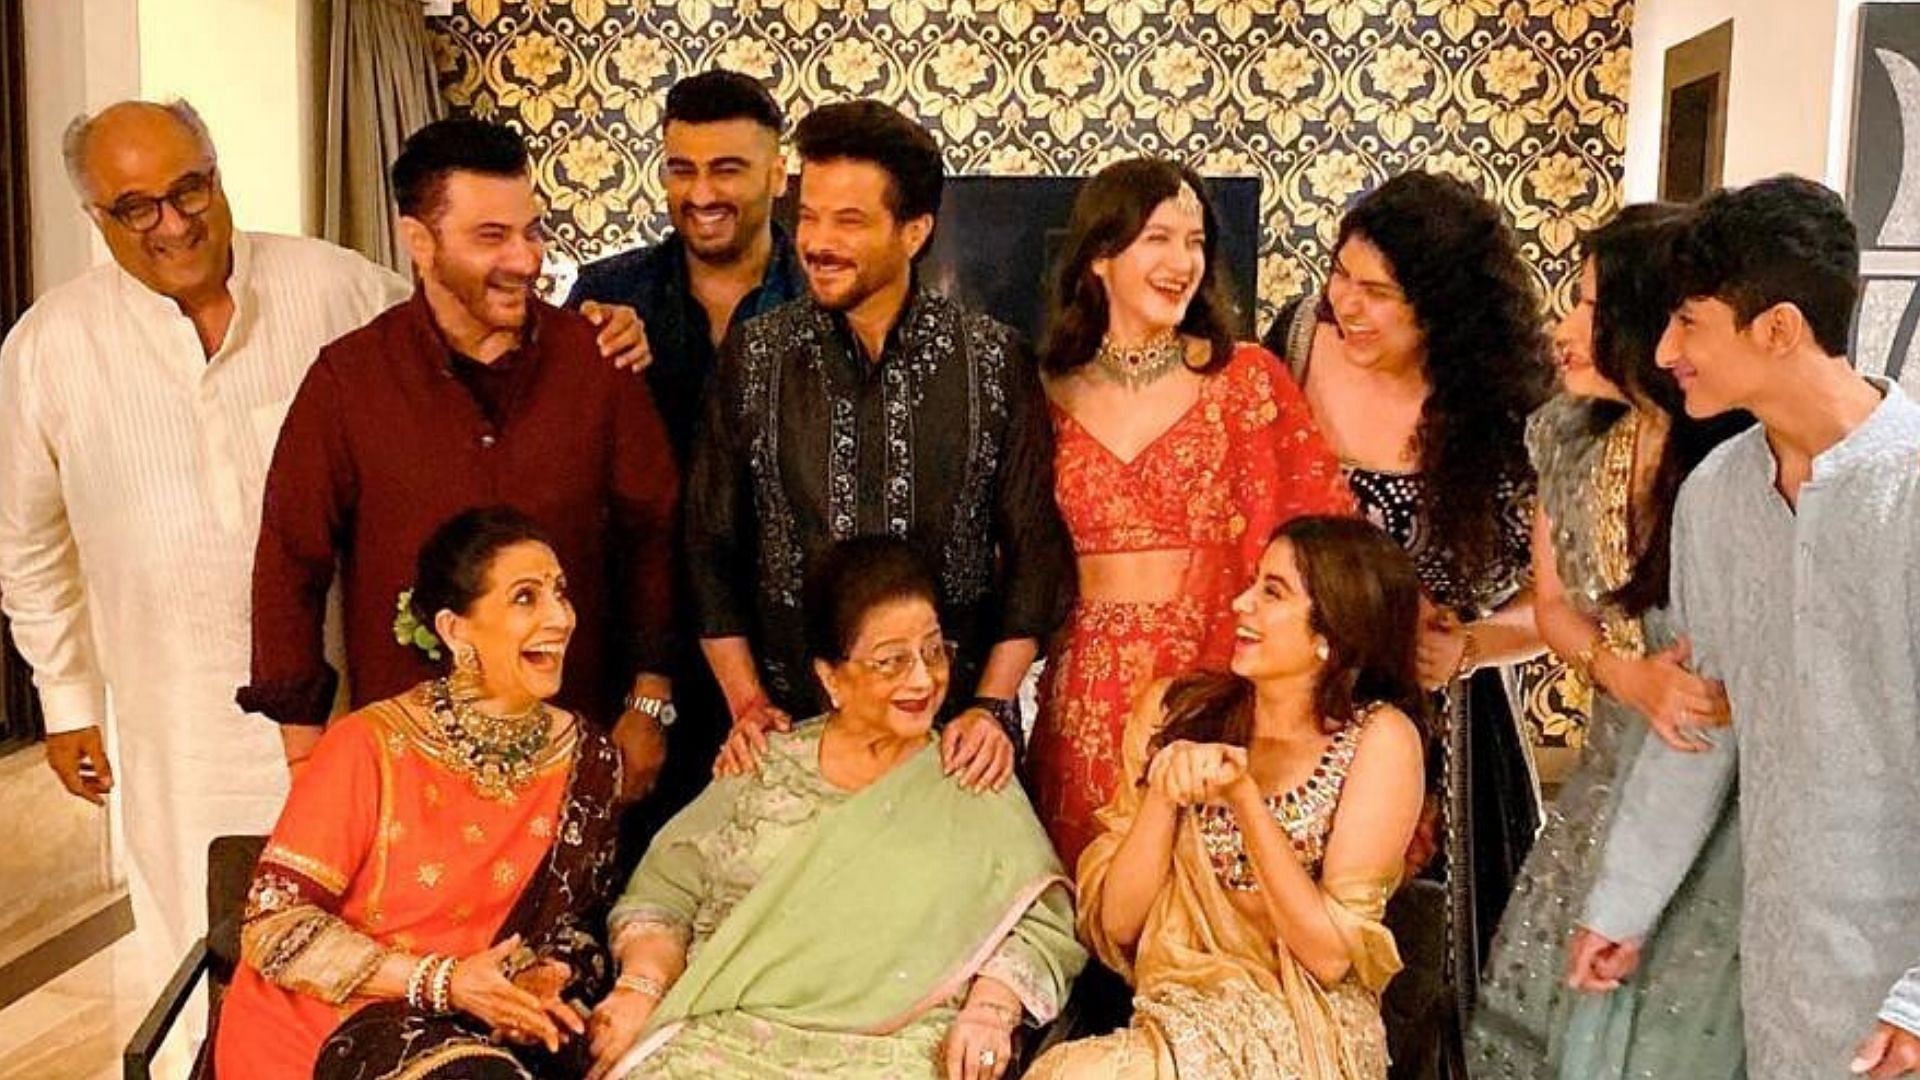 Anil Kapoor, Arjun Kapoor and their family take a Diwali photo together.